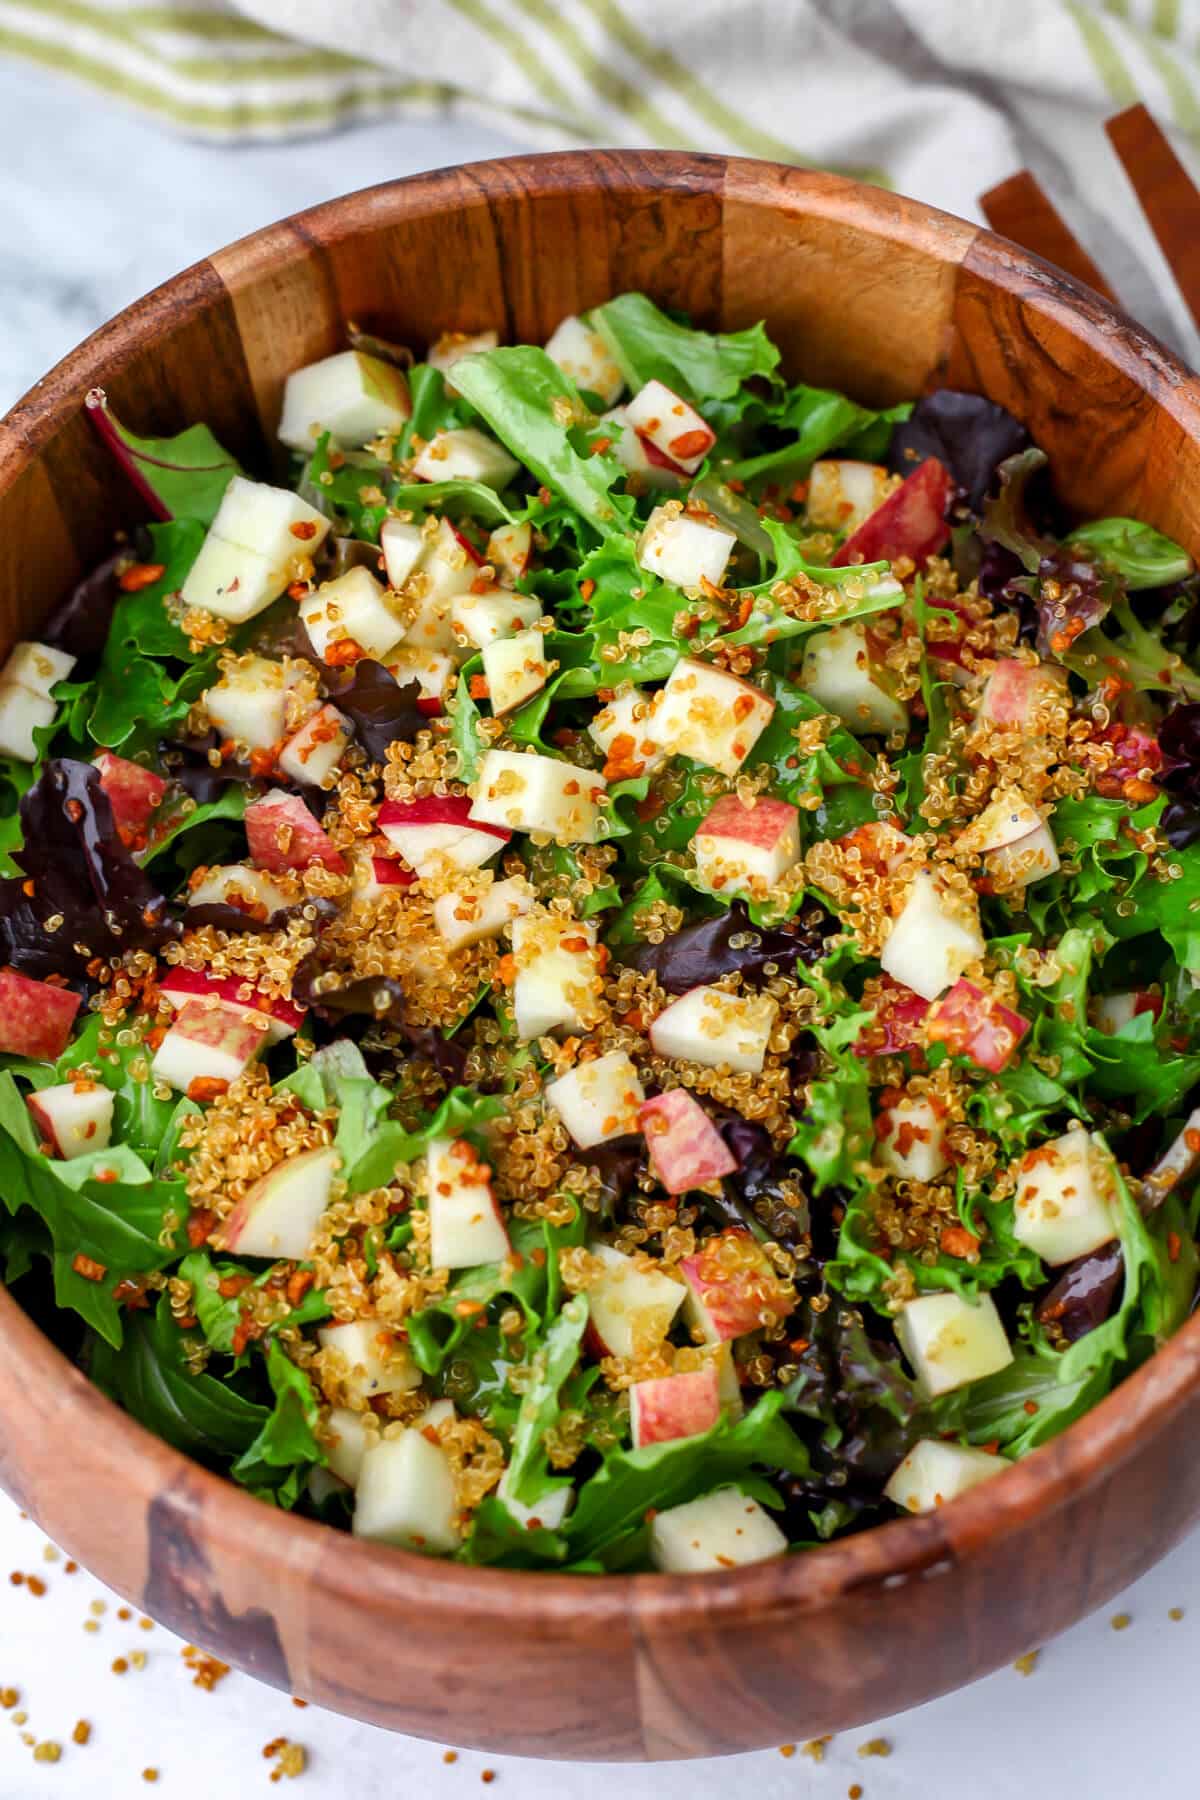 A vegan apple salad with crunchy quinoa sprinkled on top.